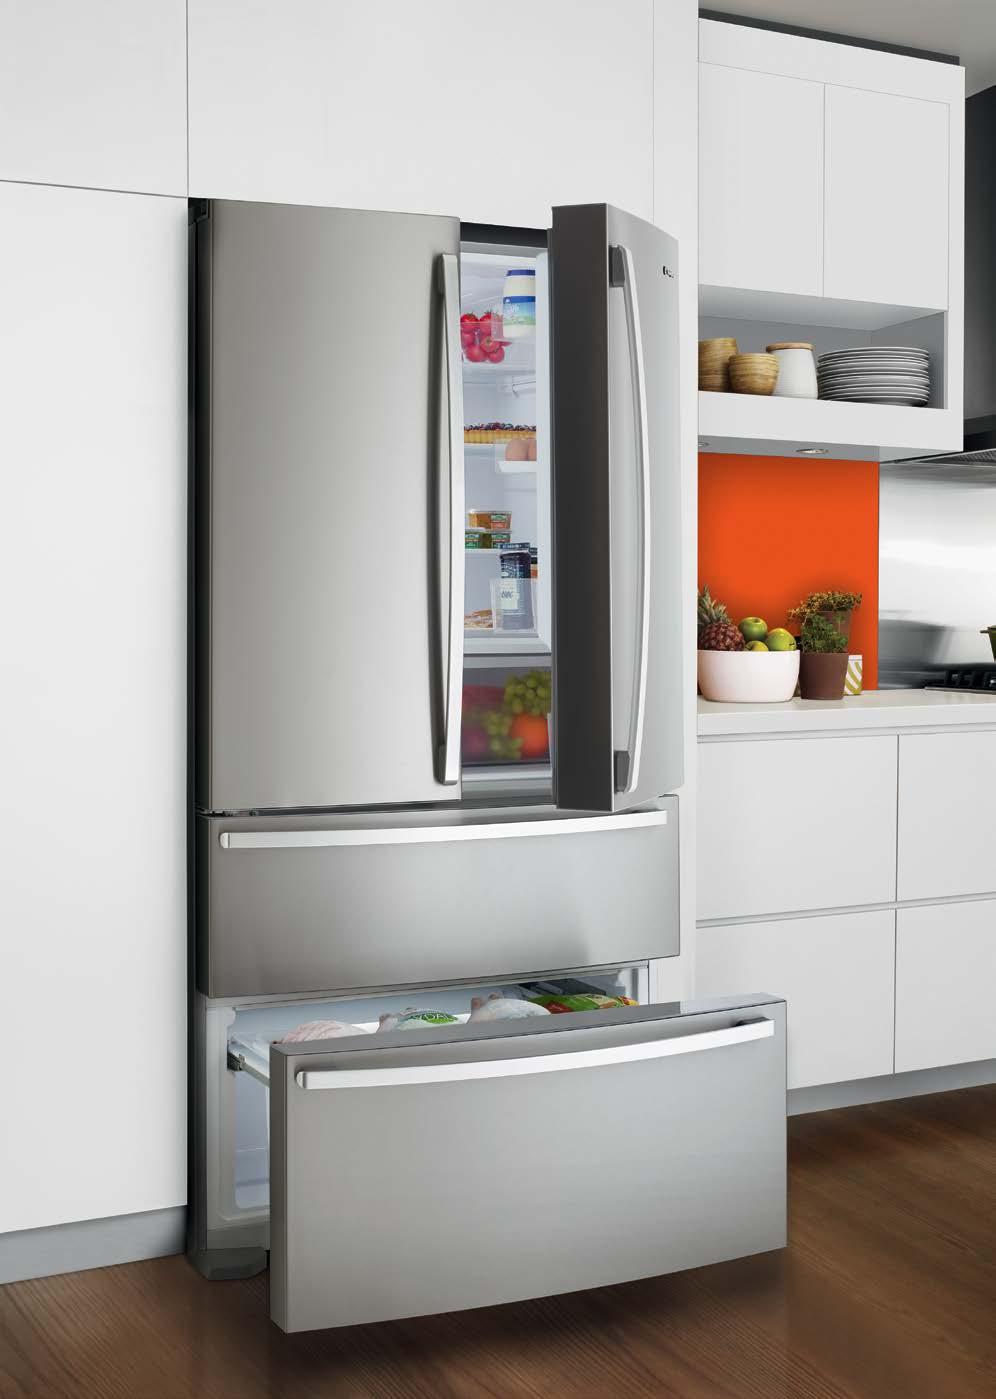 Large french door Features Model E6200SA gross capacity (litres) 631 food compartment gross capacity (litres) 411 freezer compartment gross capacity (litres) 220 dimensions (and clearances) refer to